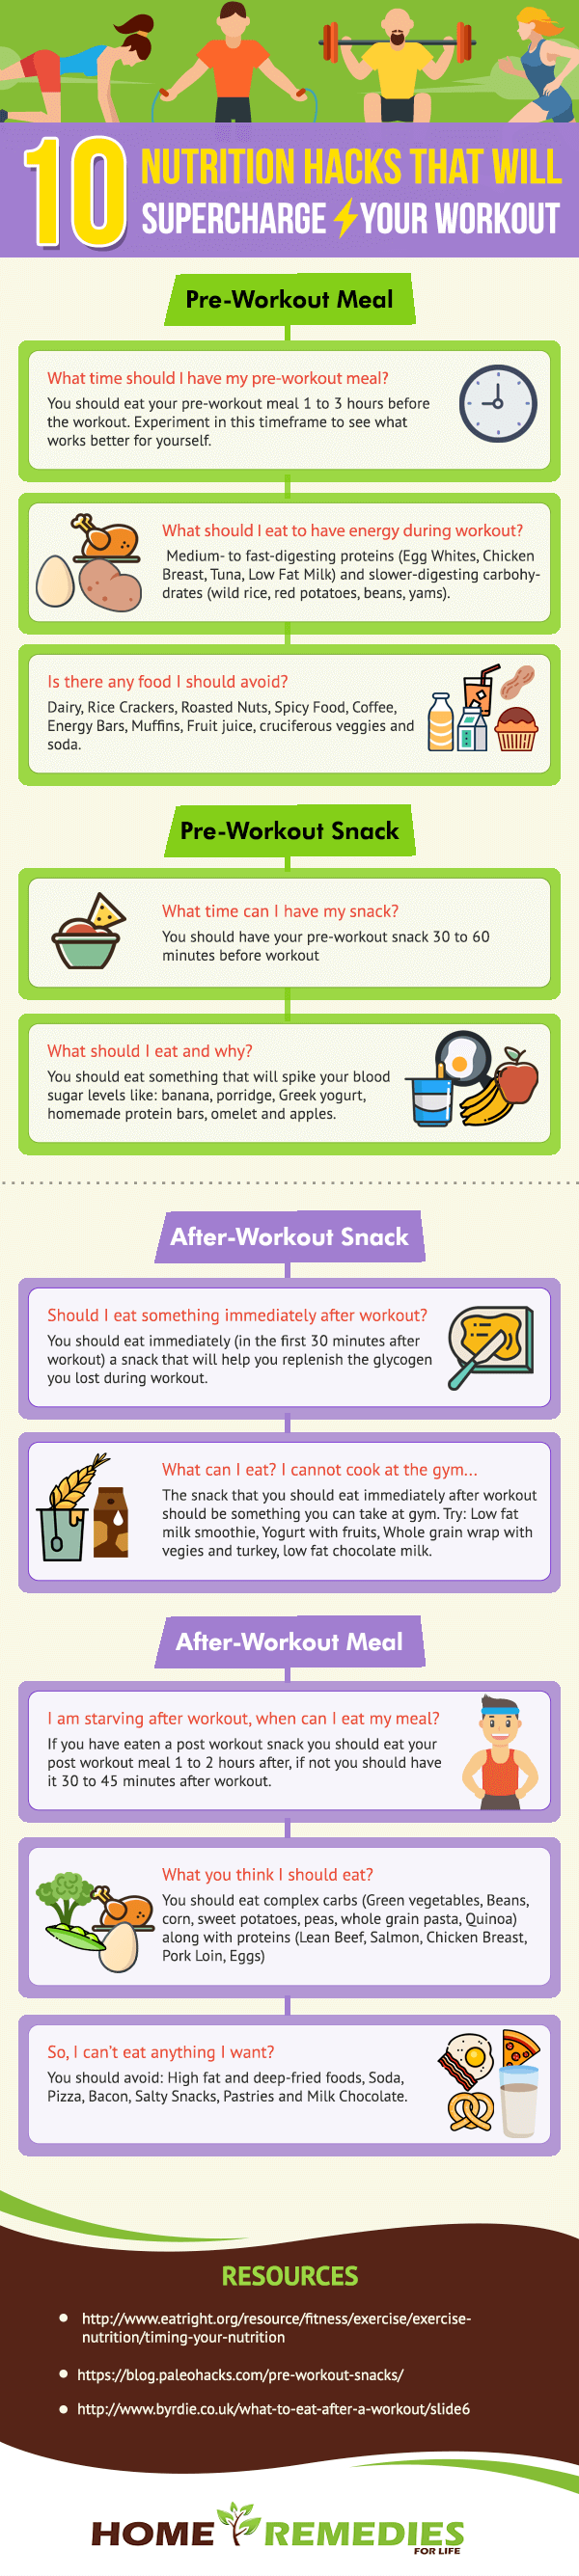 10 Nutrition Hacks That Will Supercharge Your Workout Infographic